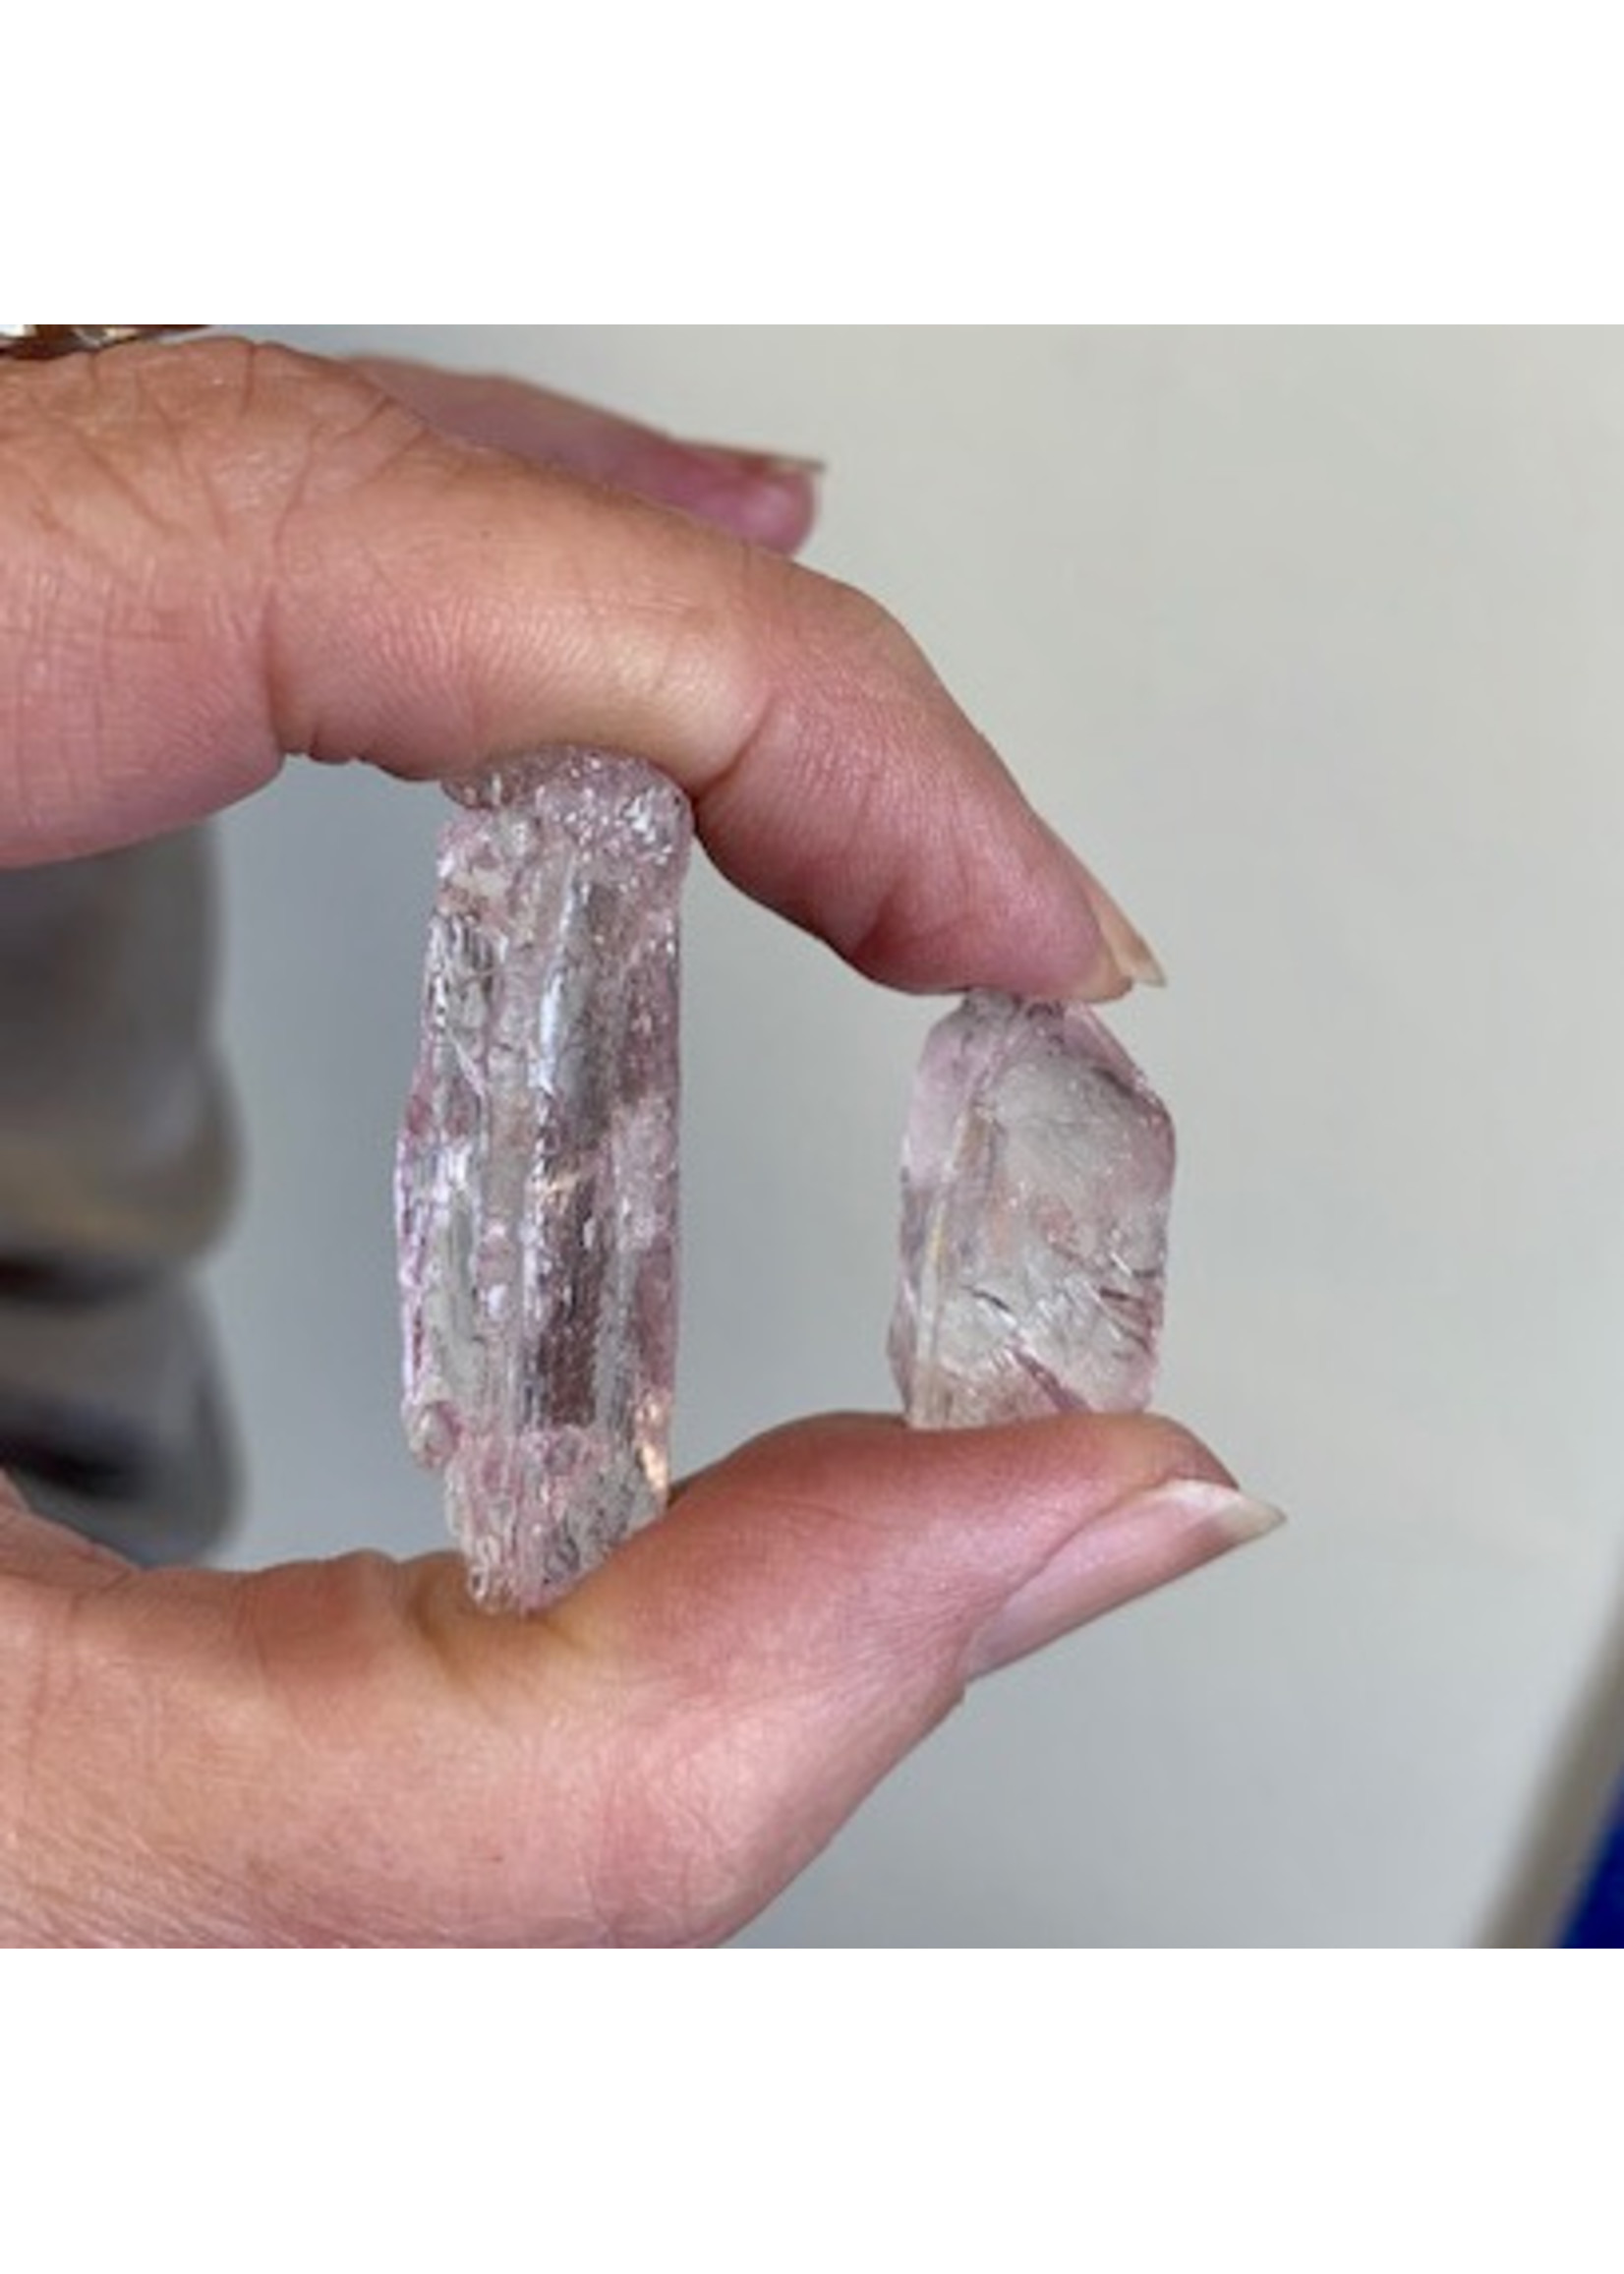 Kunzite Rough for opening the heart